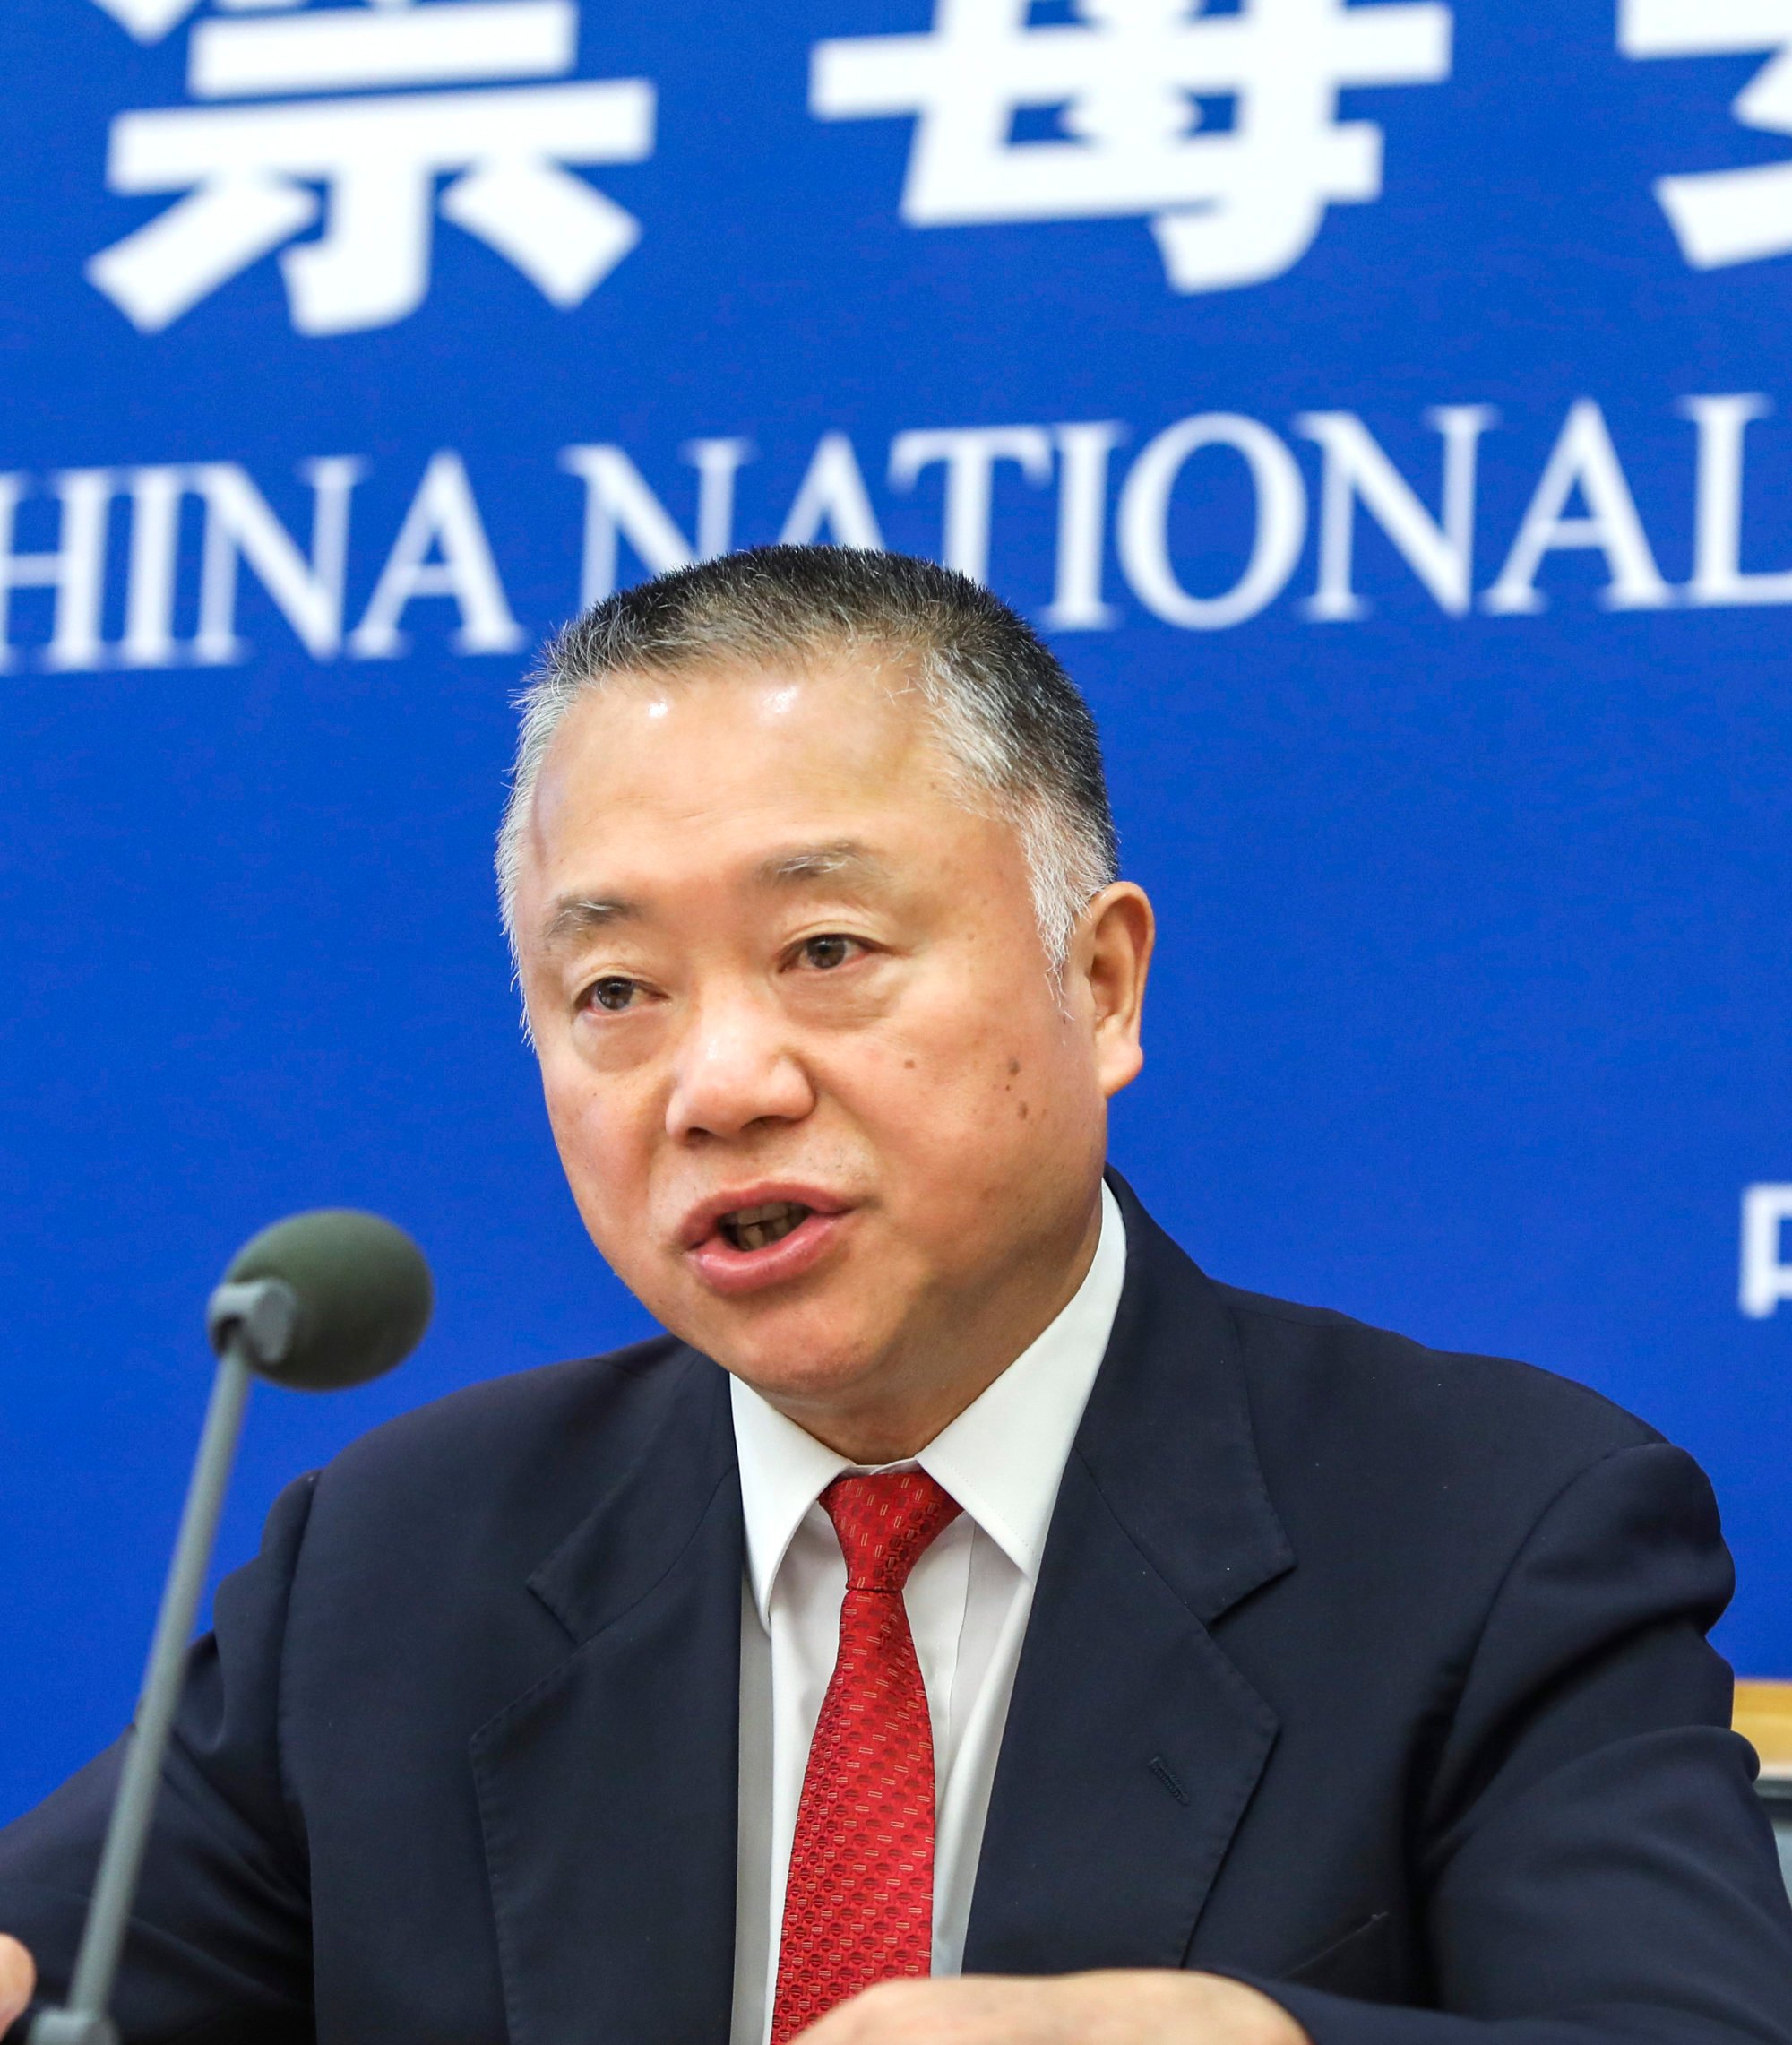 Liu Yuejin, deputy director of China’s National Narcotics Control Commission, has acknowledged that cooperation has been “extremely limited”. Photo: SCMP